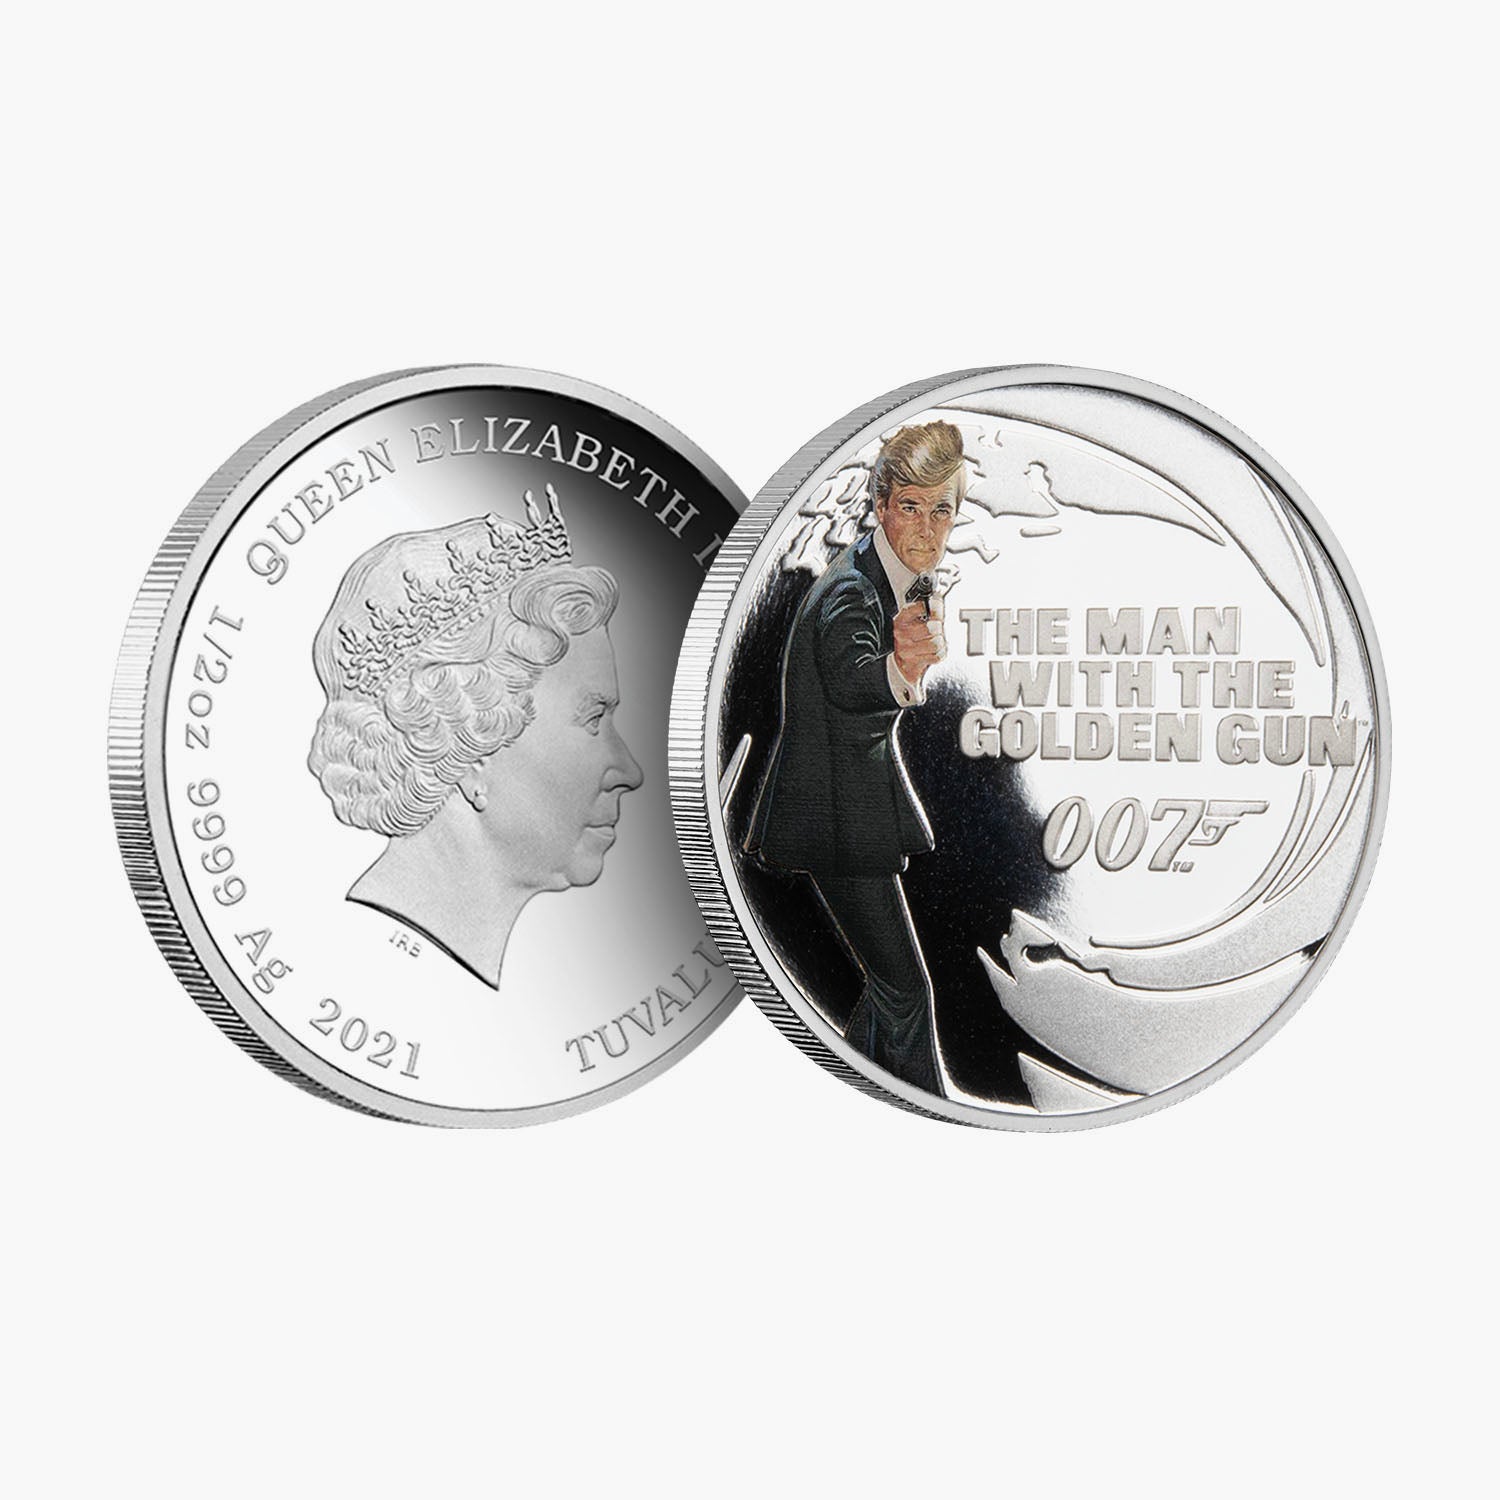 James Bond - The Man With The Golden Gun Solid Silver Movie Coin